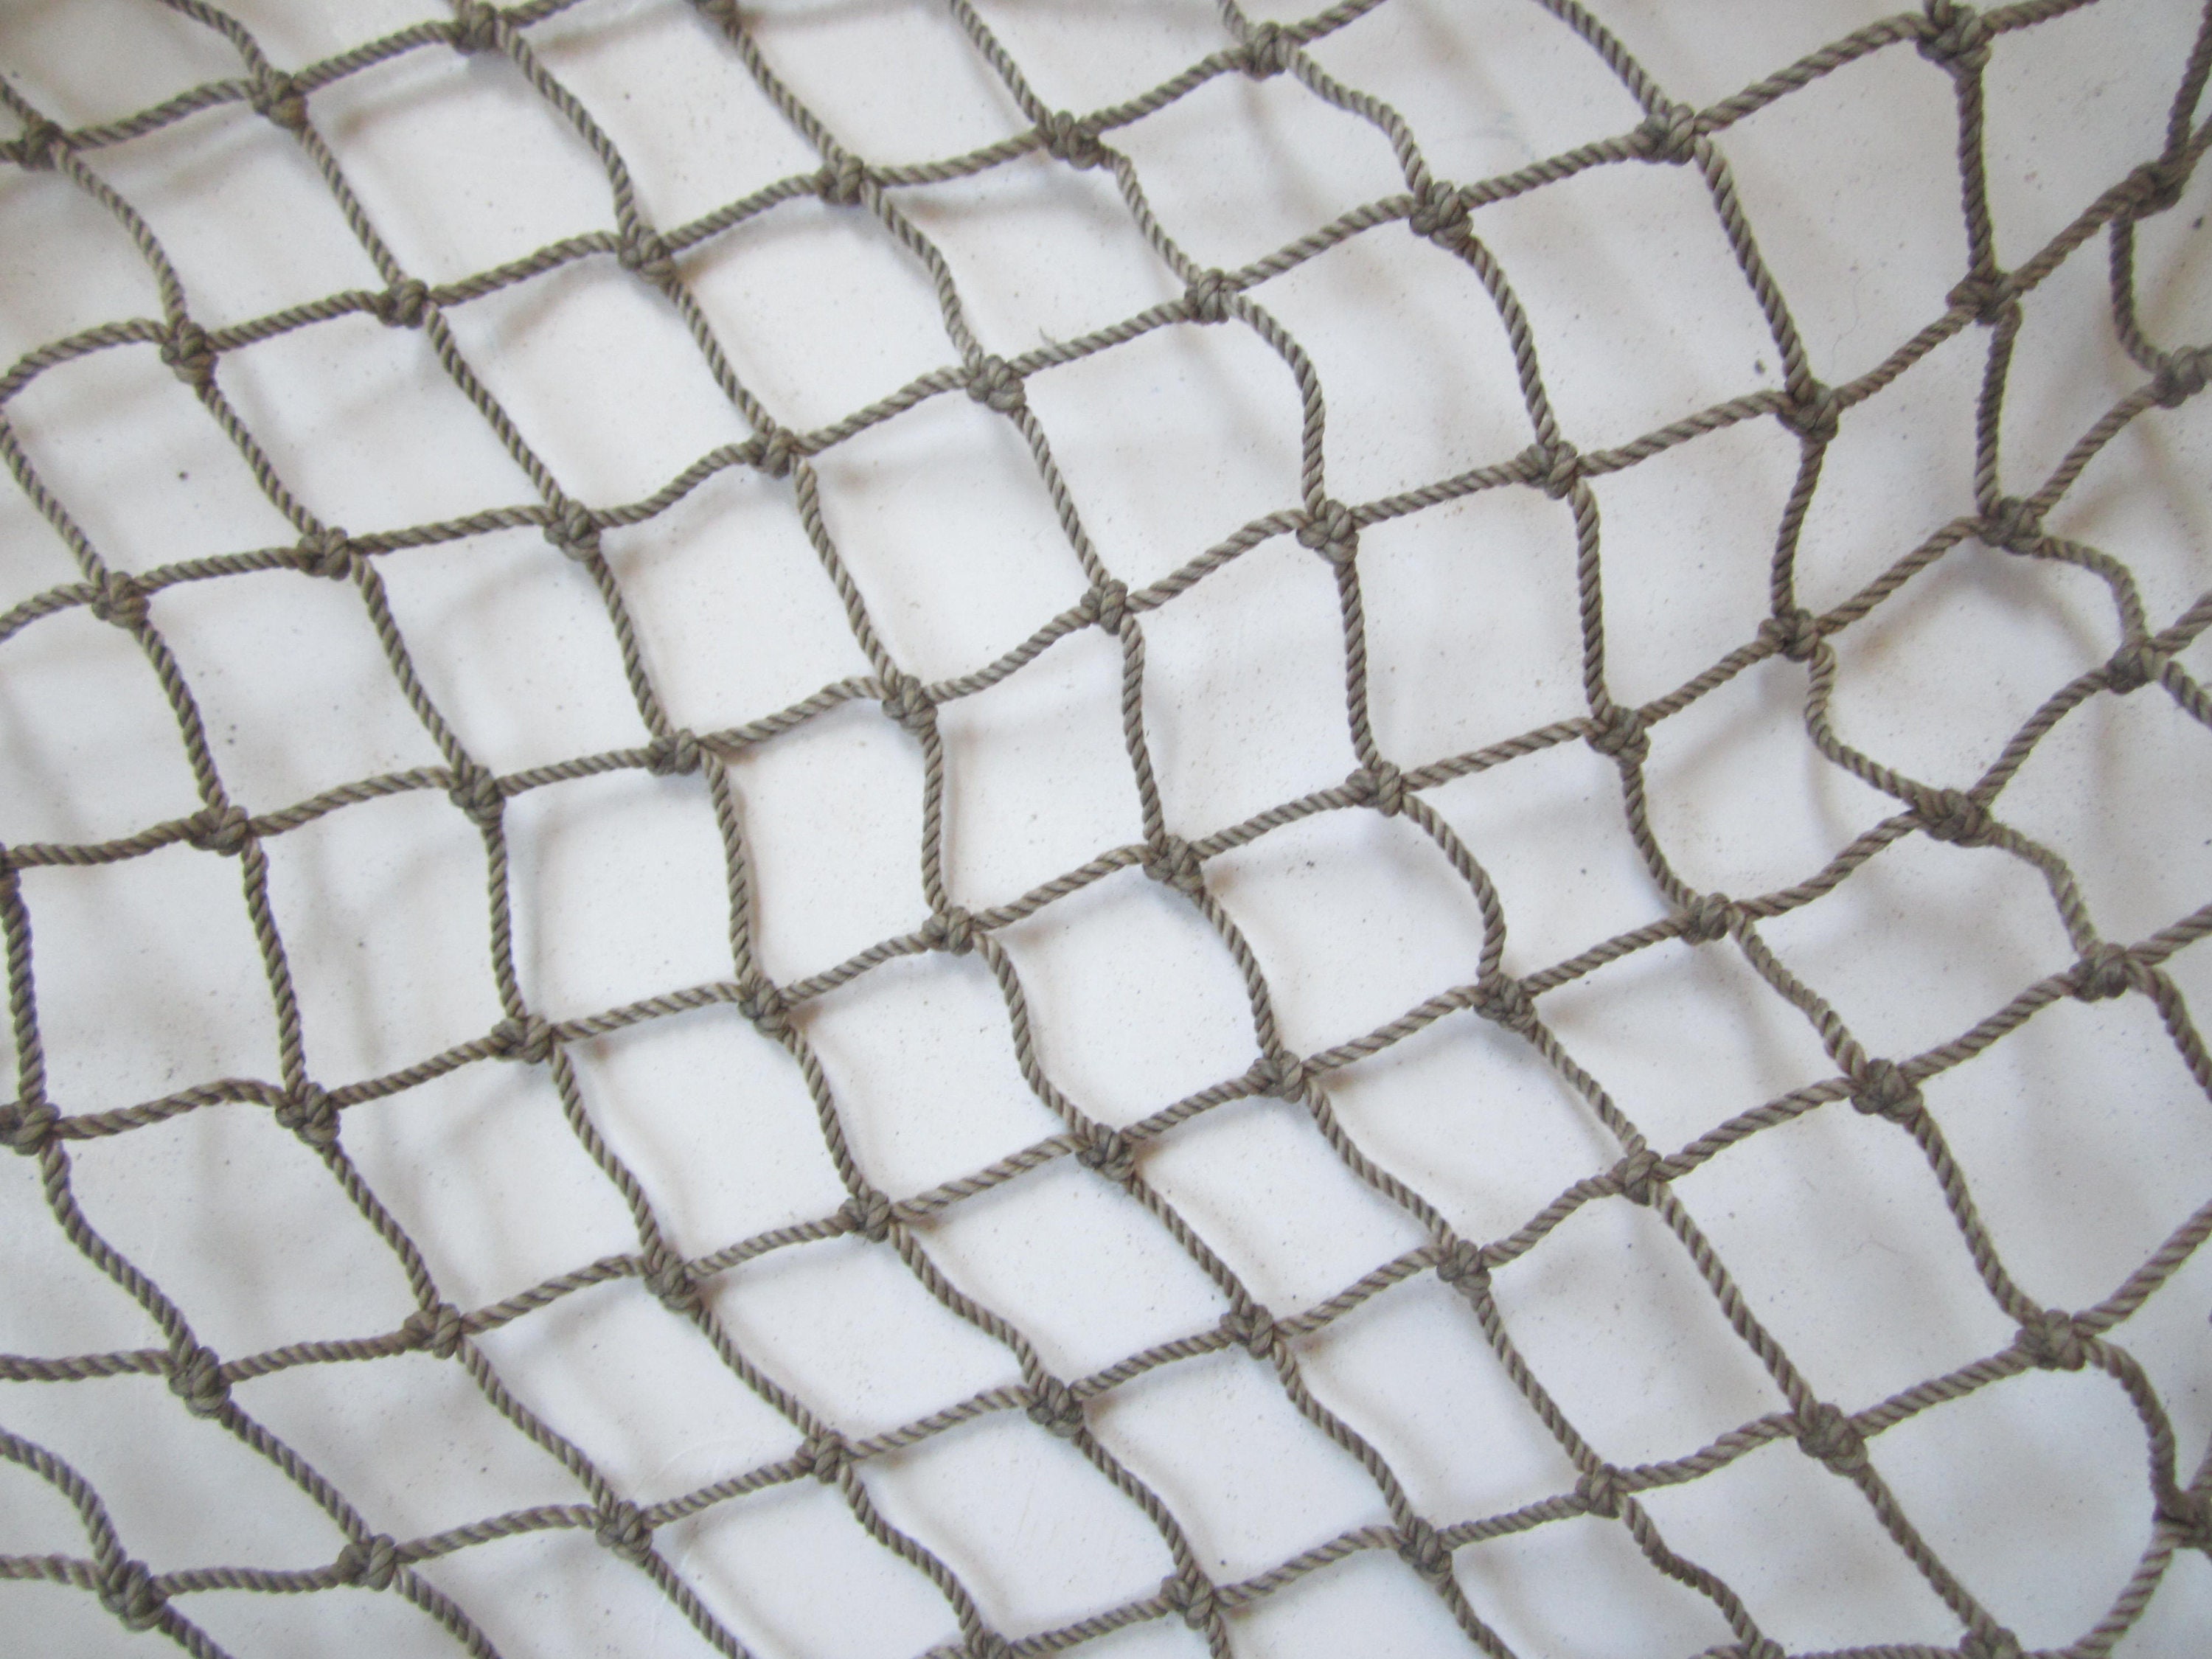 Authentic Fishing Net - 5'x5' - Old Vintage Fish Netting